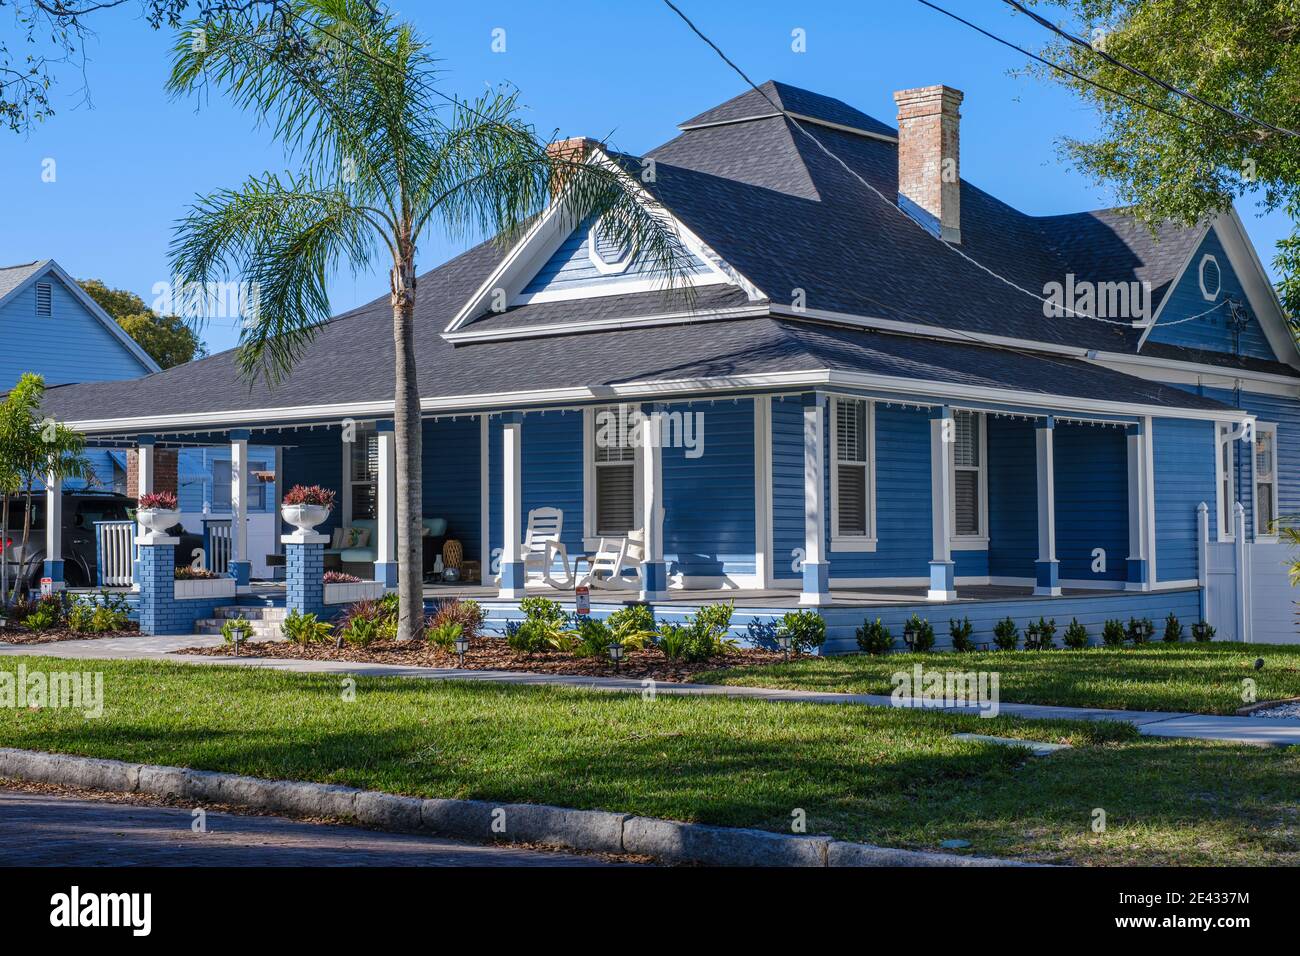 Desirable home - Tampa Heights, Tampa, Florida. Established in 1883. The neighborhood is going through gentrification. Stock Photo